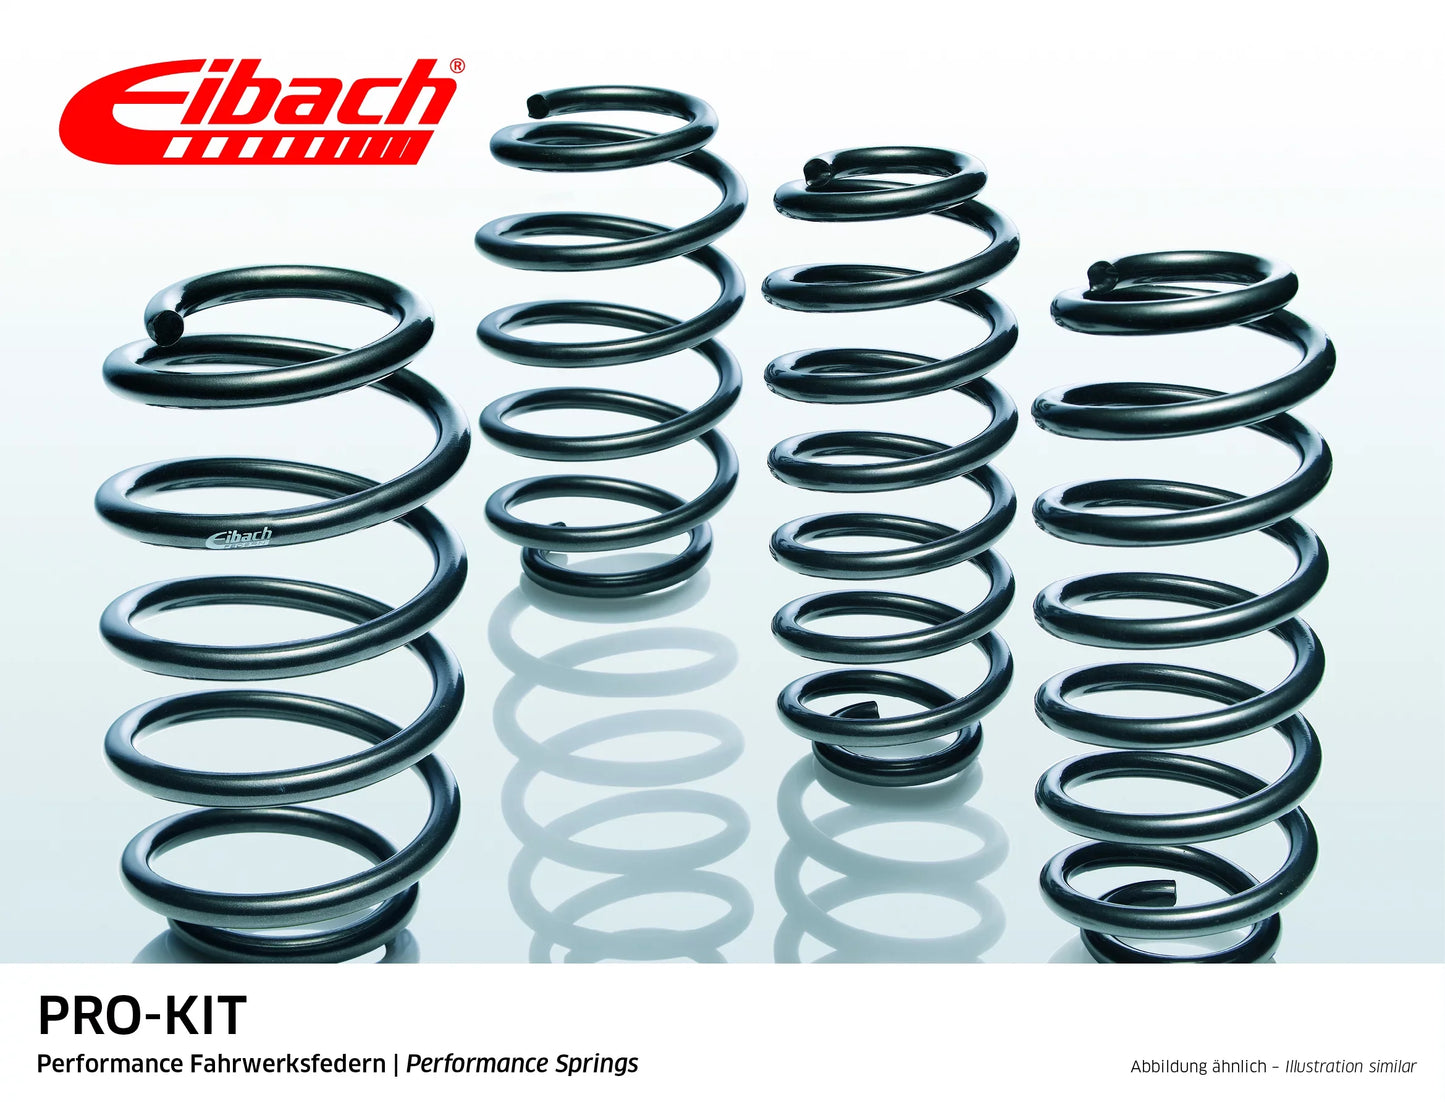 Eibach Pro-Kit Lowering Springs (E10-10-004-01-22) at £277.79